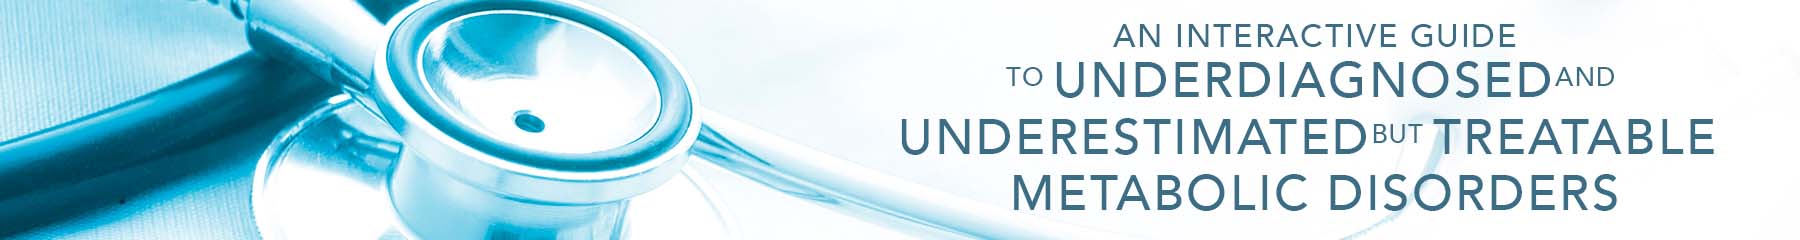 An Interactive Guide to the Underdiagnosed, Underestimated, but Treatable Metabolic Disorders